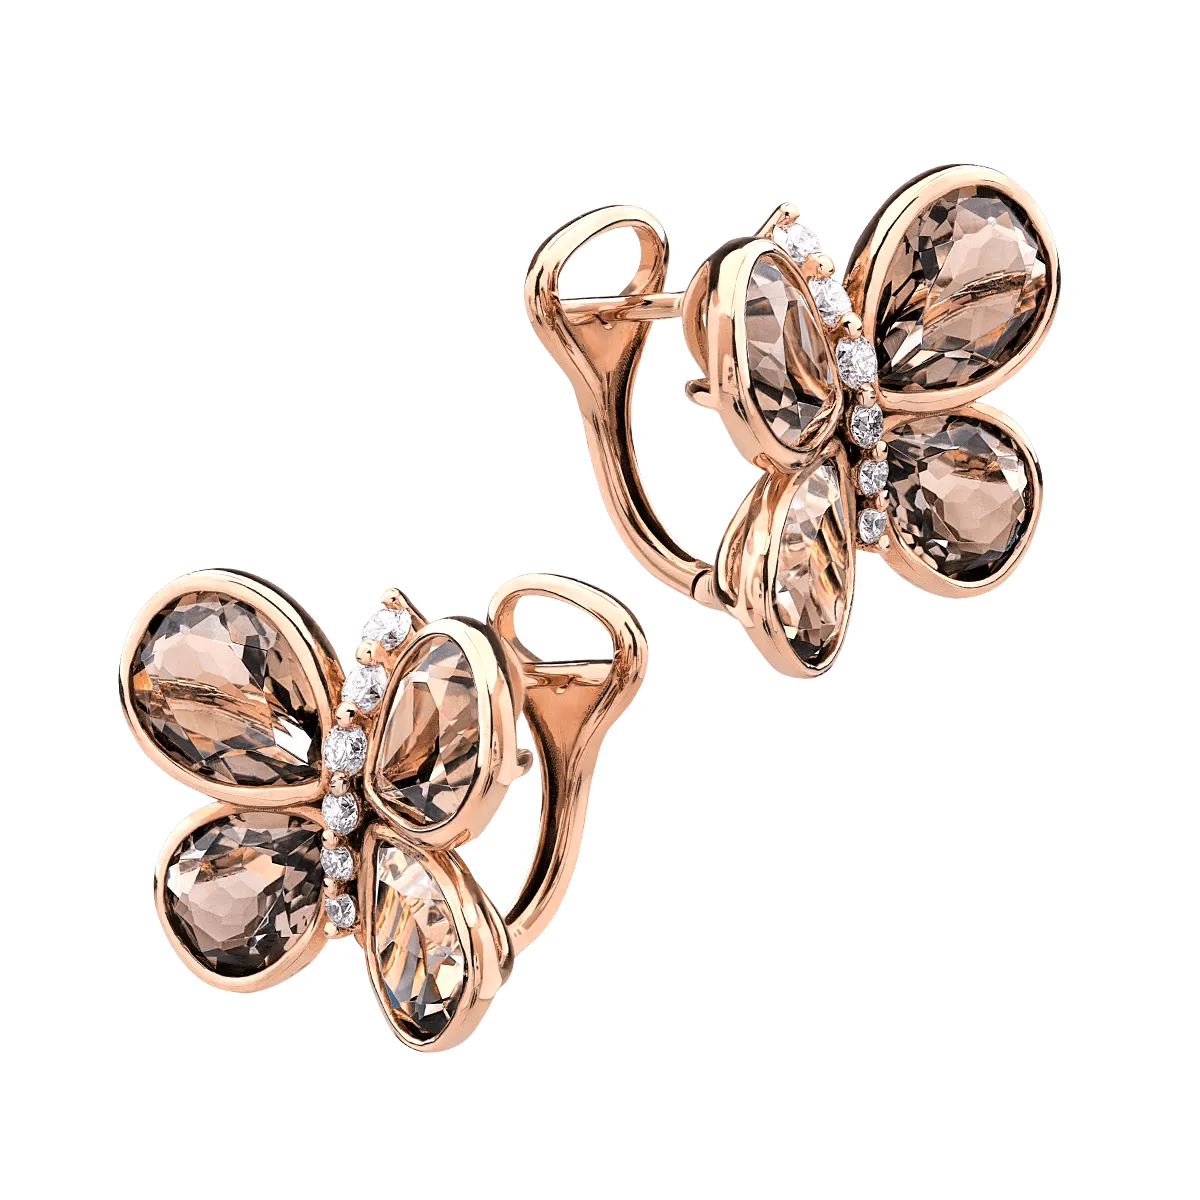 18K rose gold butterflies earrings with 7.865ct smoky quartz and 0.296ct diamonds